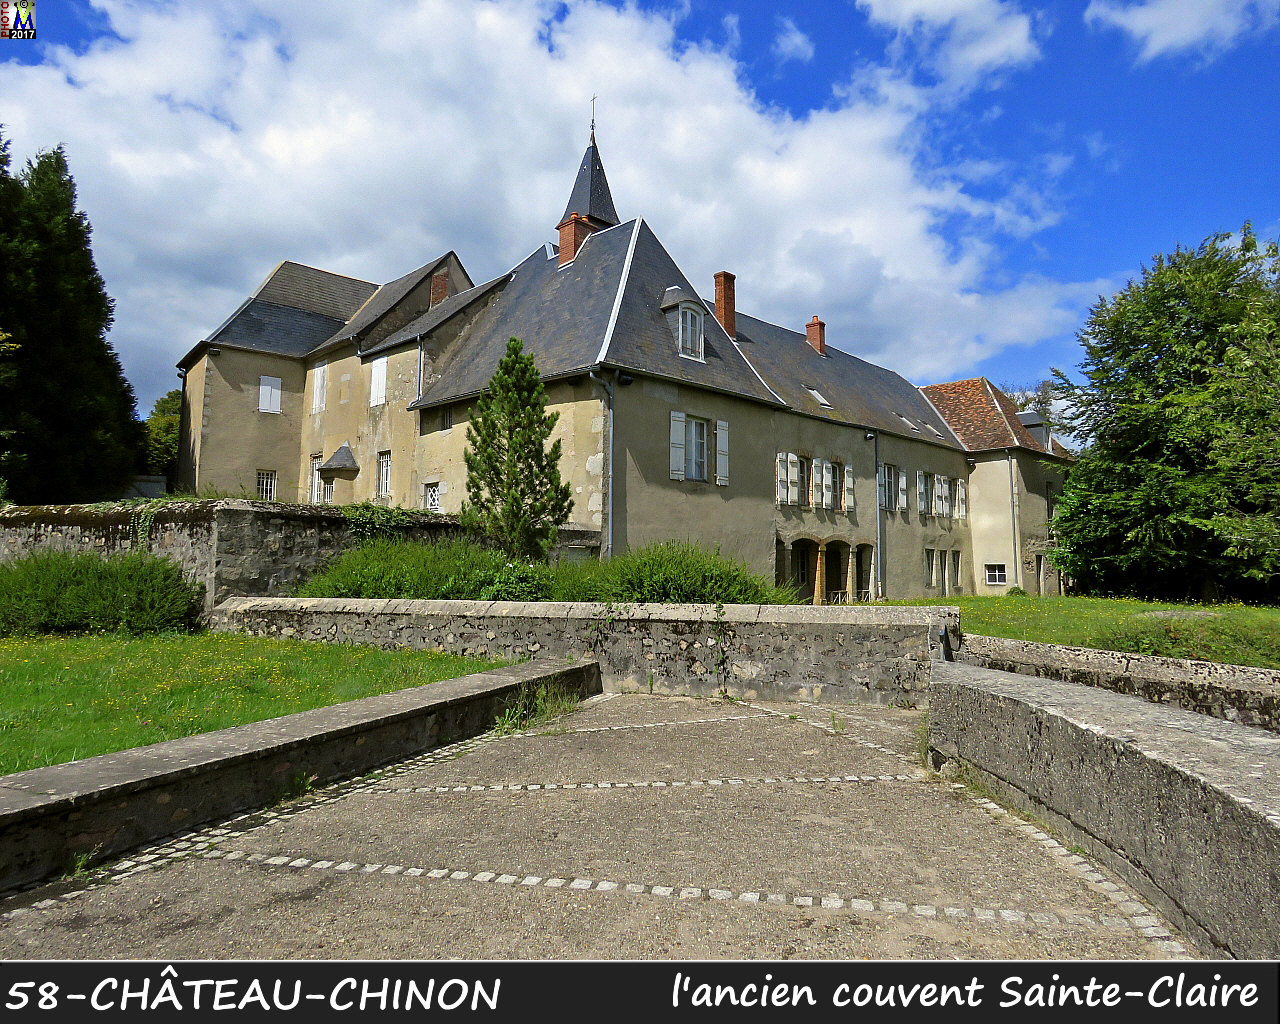 58CHATEAU-CHINON_couvent_100.jpg